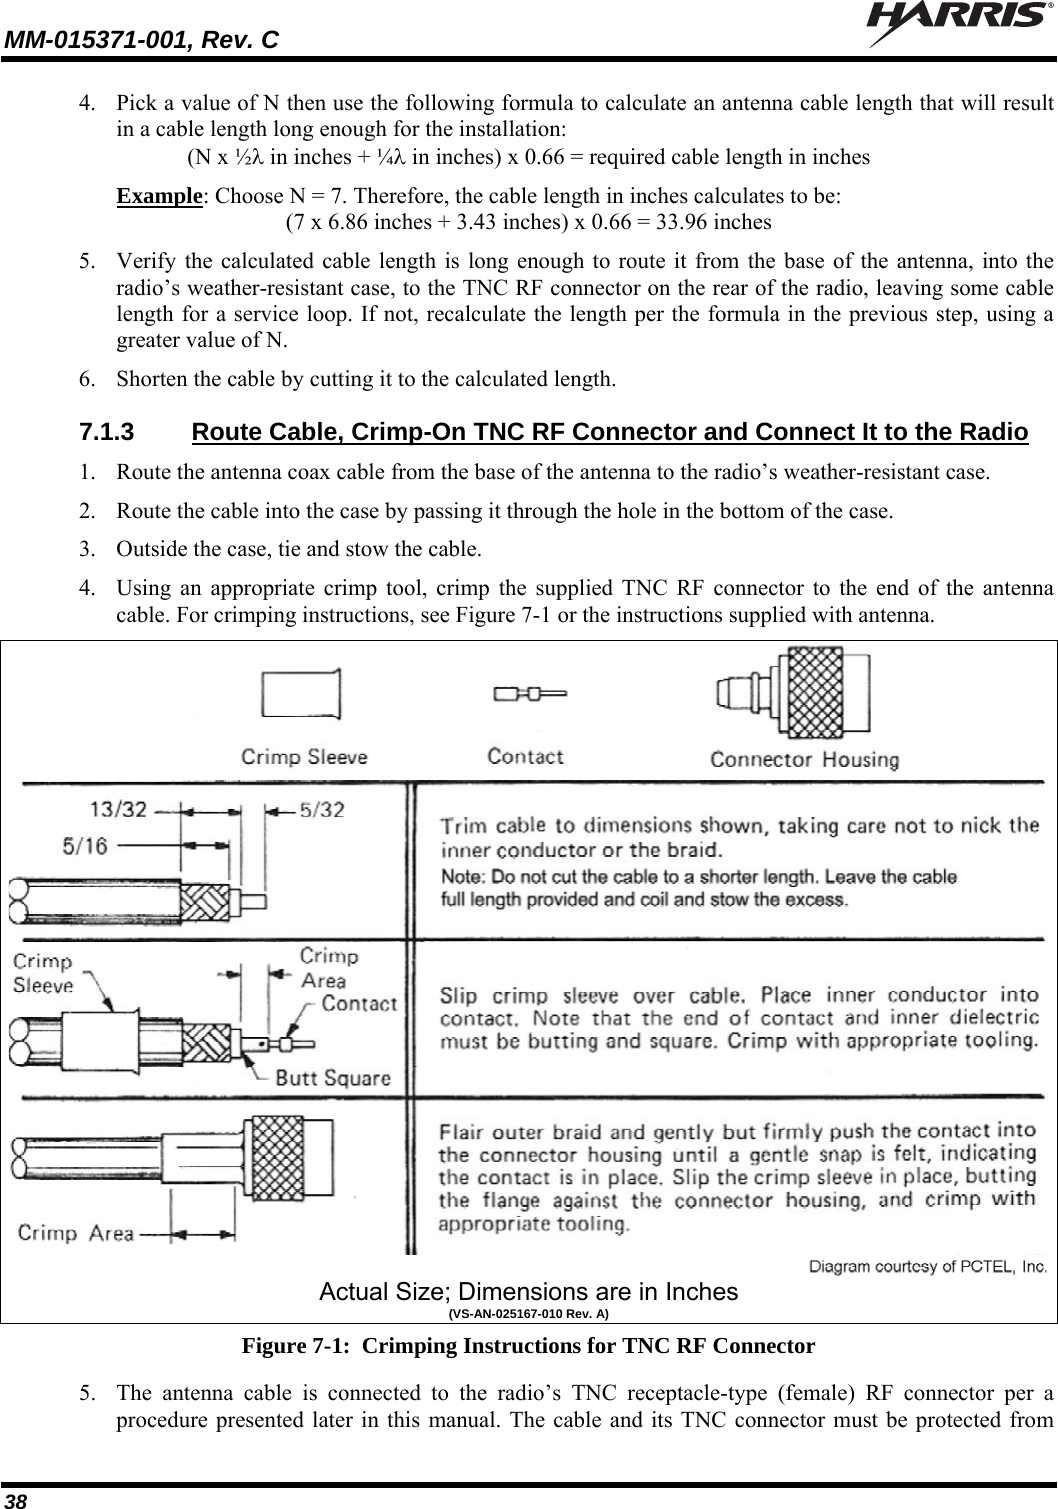 MM-015371-001, Rev. C   38 4. Pick a value of N then use the following formula to calculate an antenna cable length that will result in a cable length long enough for the installation: (N x ½ in inches + ¼ in inches) x 0.66 = required cable length in inches Example: Choose N = 7. Therefore, the cable length in inches calculates to be: (7 x 6.86 inches + 3.43 inches) x 0.66 = 33.96 inches 5. Verify the calculated cable length is long enough to route it from the base of the antenna, into the radio’s weather-resistant case, to the TNC RF connector on the rear of the radio, leaving some cable length for a service loop. If not, recalculate the length per the formula in the previous step, using a greater value of N. 6. Shorten the cable by cutting it to the calculated length. 7.1.3  Route Cable, Crimp-On TNC RF Connector and Connect It to the Radio 1. Route the antenna coax cable from the base of the antenna to the radio’s weather-resistant case. 2. Route the cable into the case by passing it through the hole in the bottom of the case. 3. Outside the case, tie and stow the cable. 4. Using an appropriate crimp tool, crimp the supplied TNC RF connector to the end of the antenna cable. For crimping instructions, see Figure 7-1 or the instructions supplied with antenna.  Actual Size; Dimensions are in Inches (VS-AN-025167-010 Rev. A) Figure 7-1:  Crimping Instructions for TNC RF Connector 5. The antenna cable is connected to the radio’s TNC receptacle-type (female) RF connector per a procedure presented later in this manual. The cable and its TNC connector must be protected from 